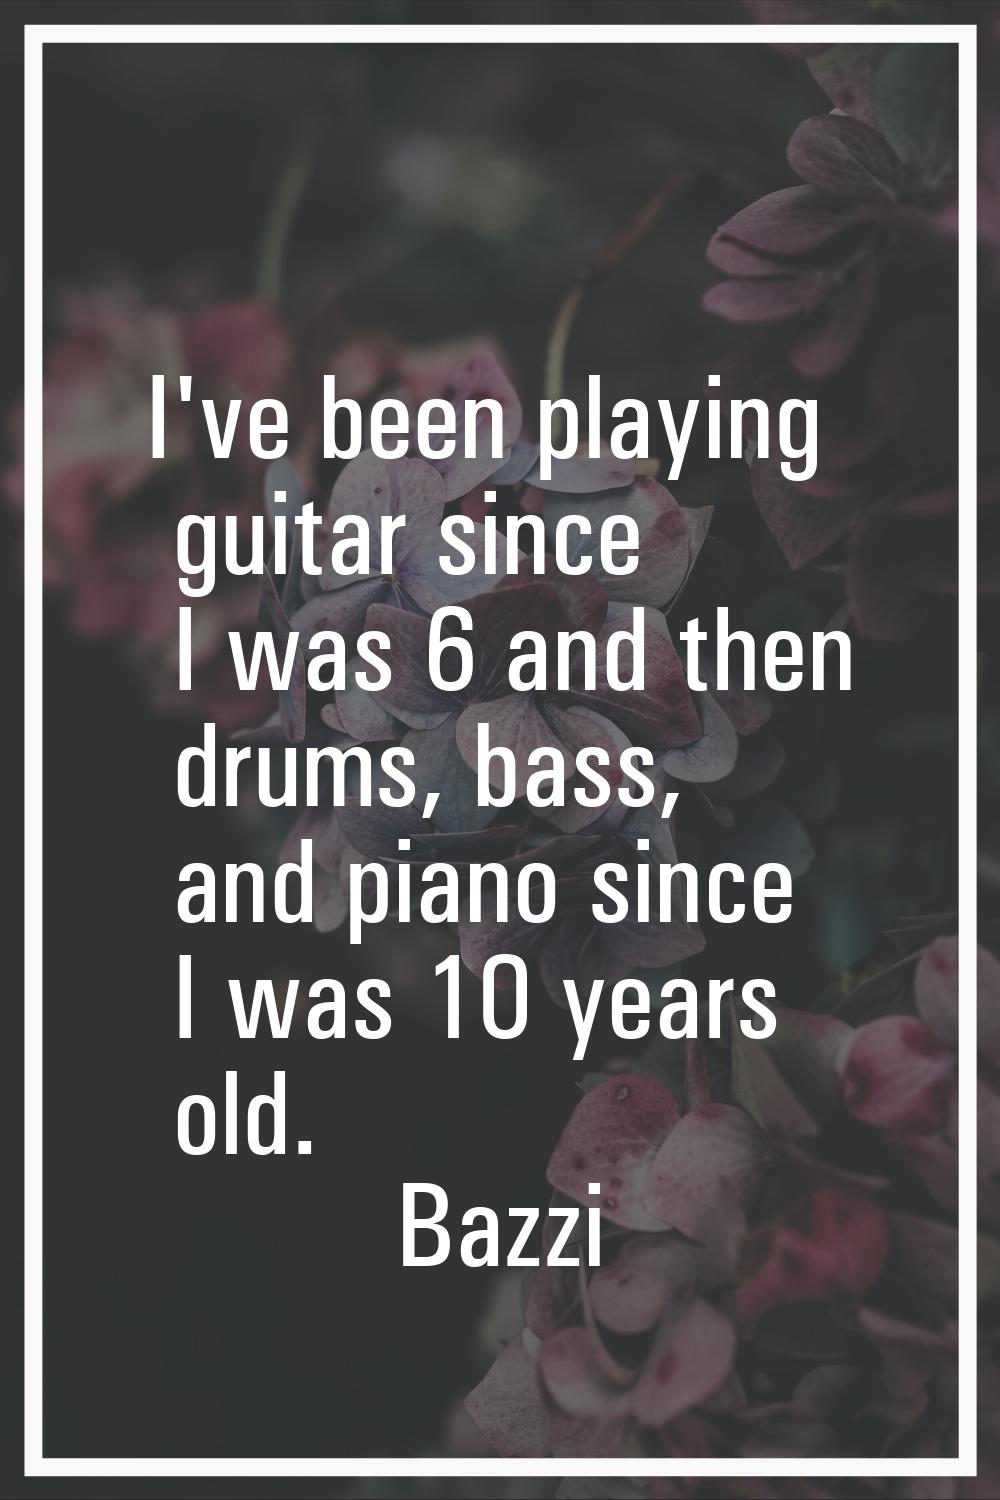 I've been playing guitar since I was 6 and then drums, bass, and piano since I was 10 years old.